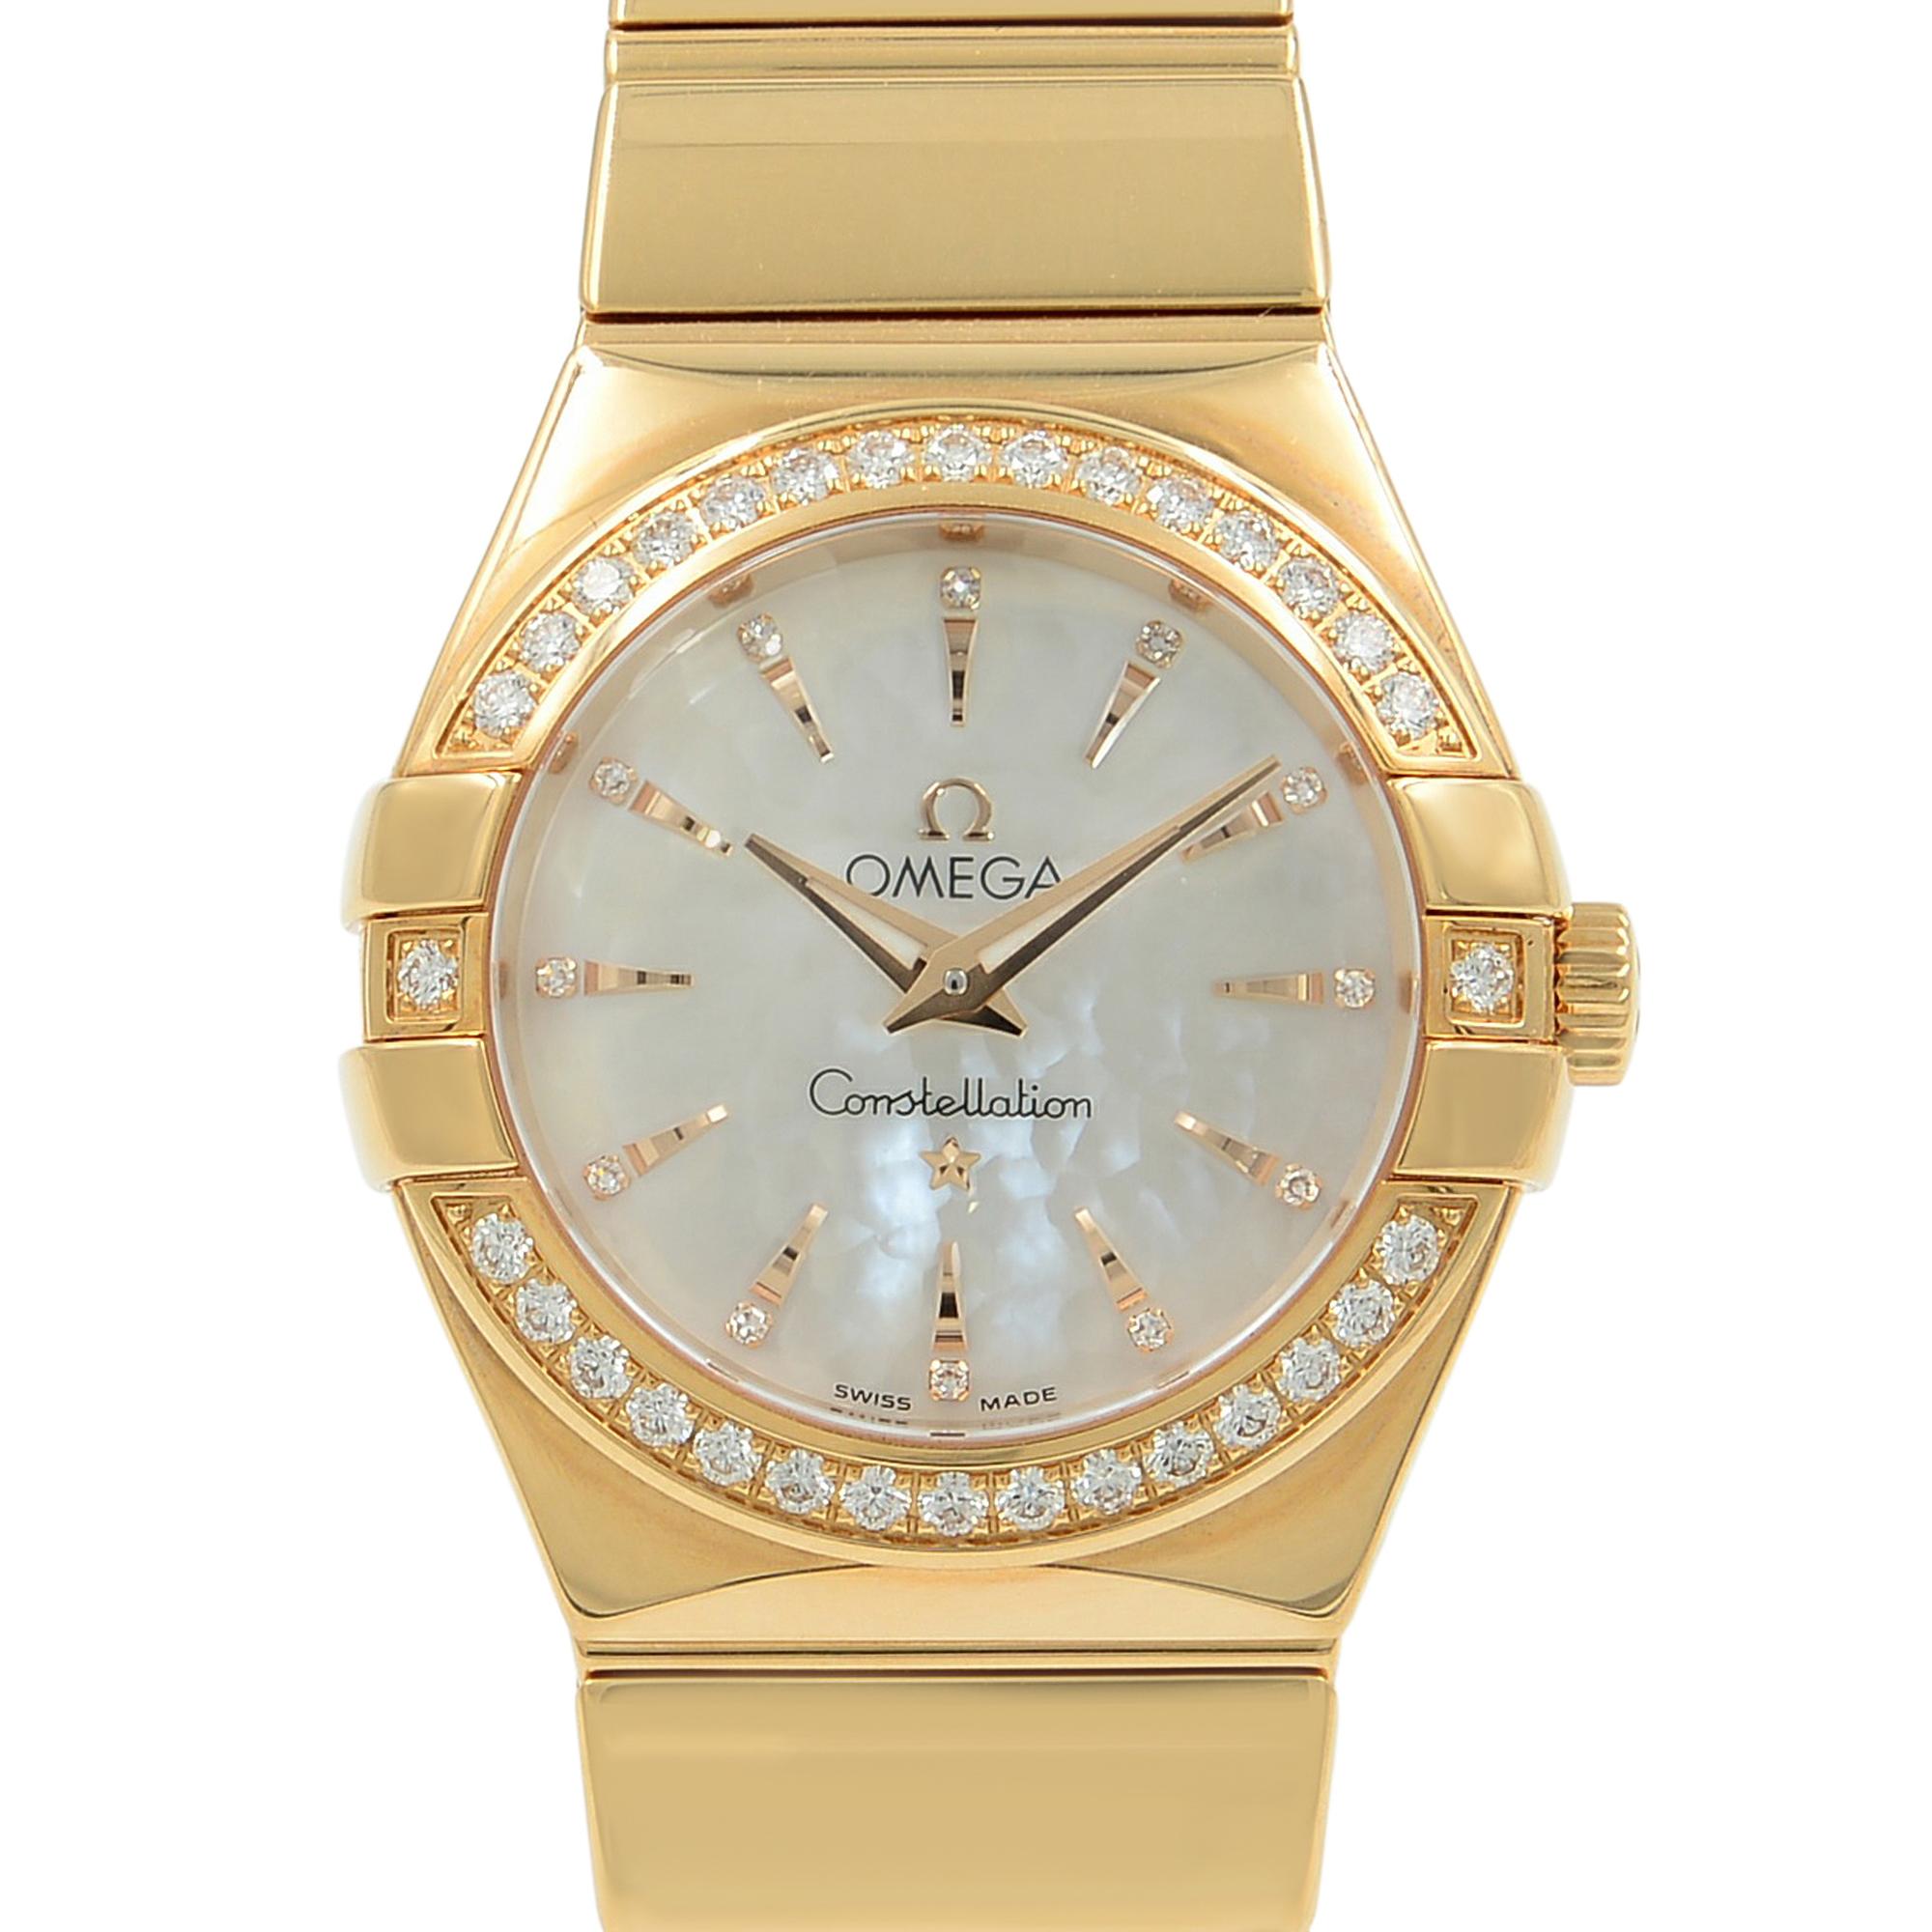 This display model Omega Constellation 123.55.27.60.55.006 is a beautiful Ladies timepiece that is powered by a quartz movement which is cased in a rose gold case. It has a round shape face, diamonds dial and has hand diamonds, sticks style markers.